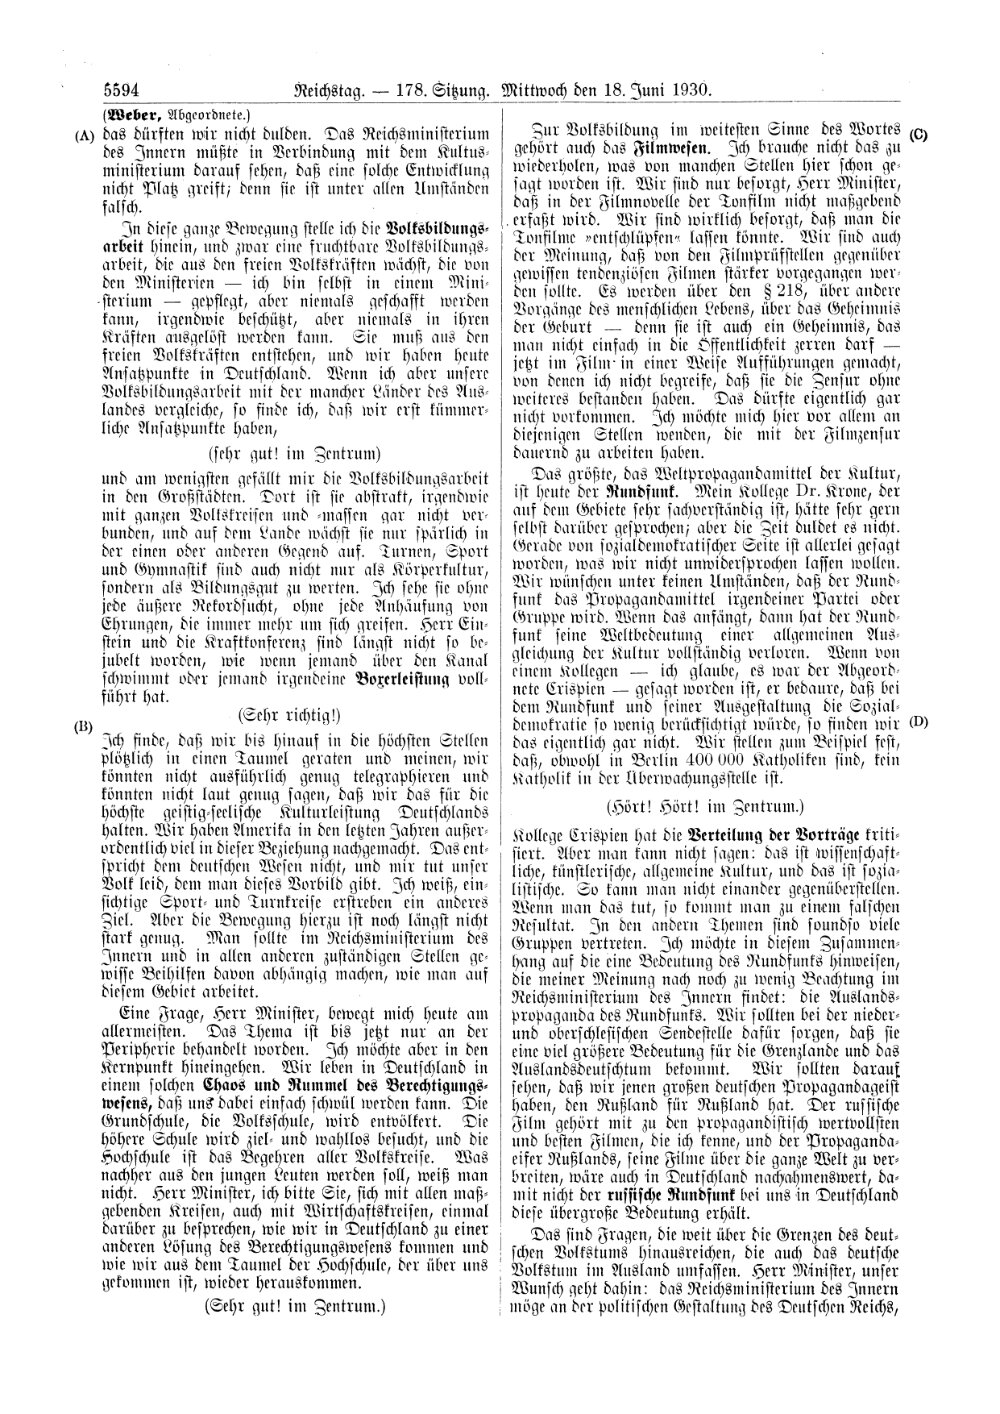 Scan of page 5594